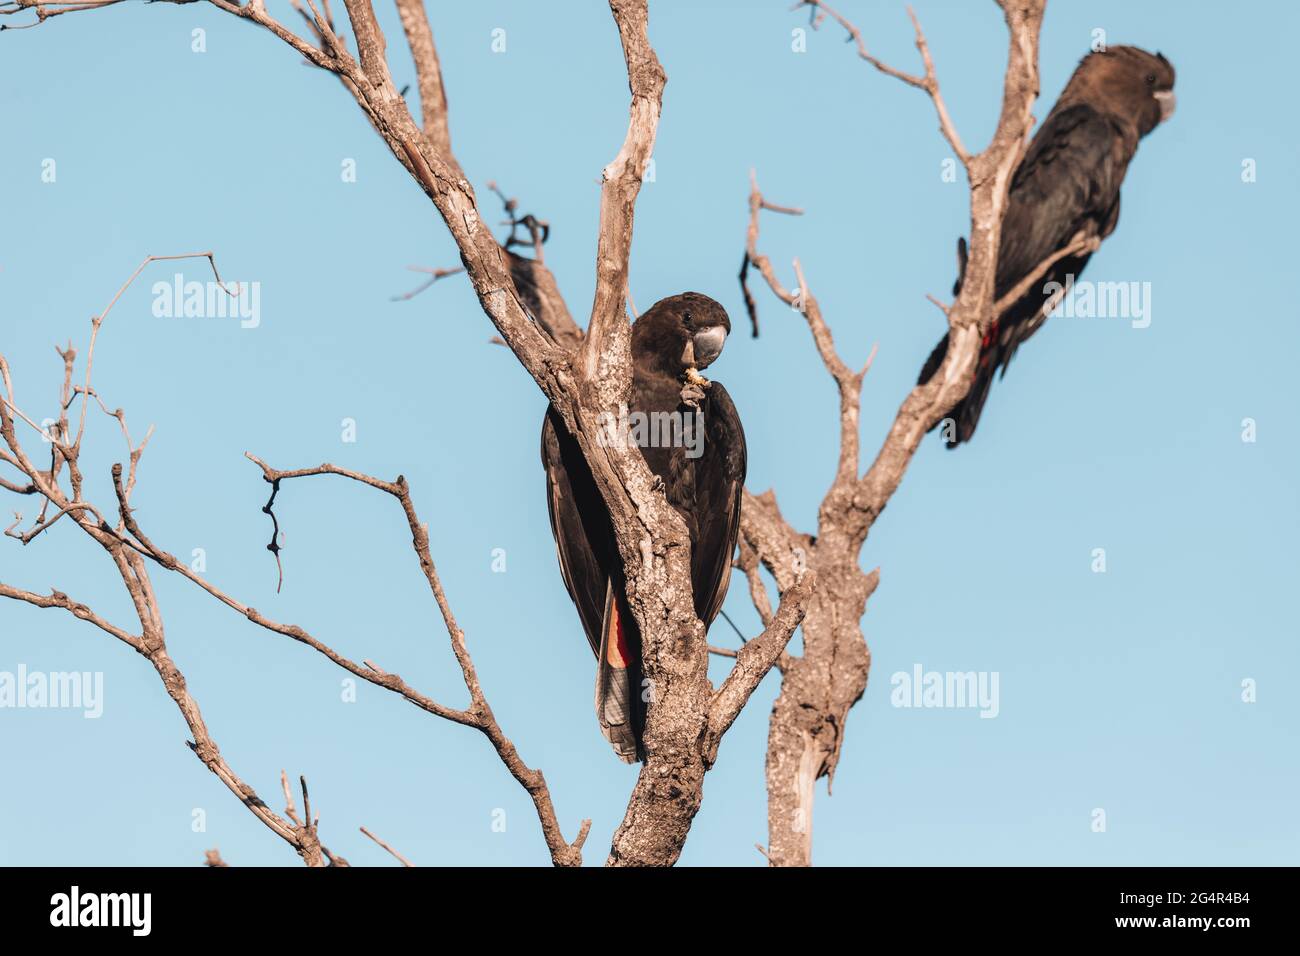 A bird perched on a tree branch Stock Photo